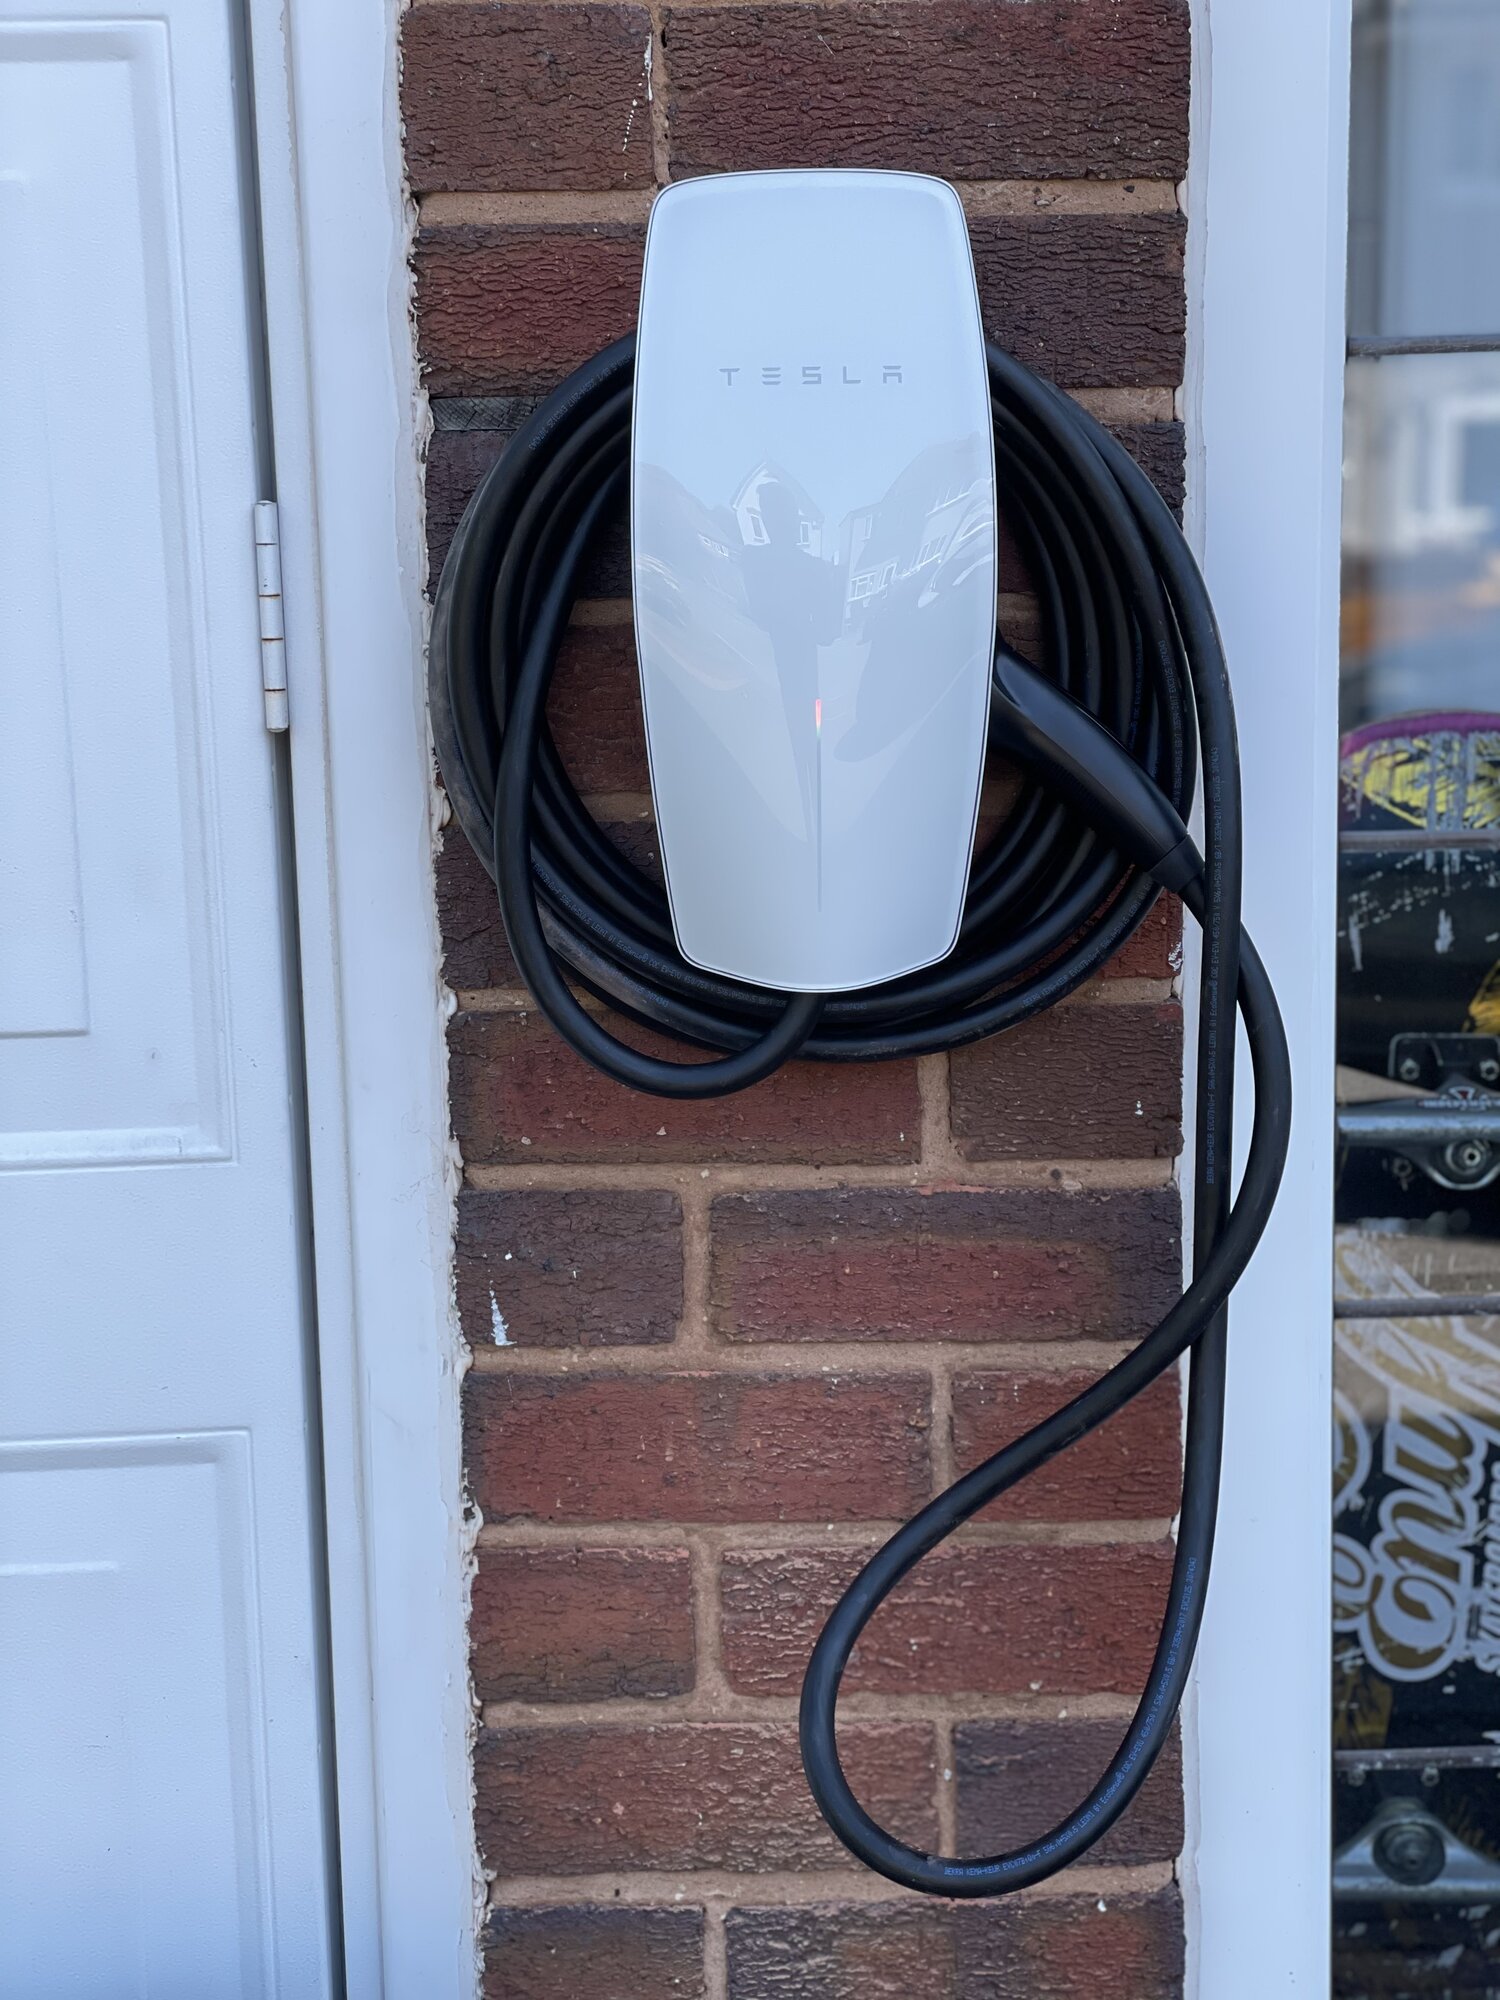 TWC Gen 3 (Tesla Wall connector) for the UK, Page 4